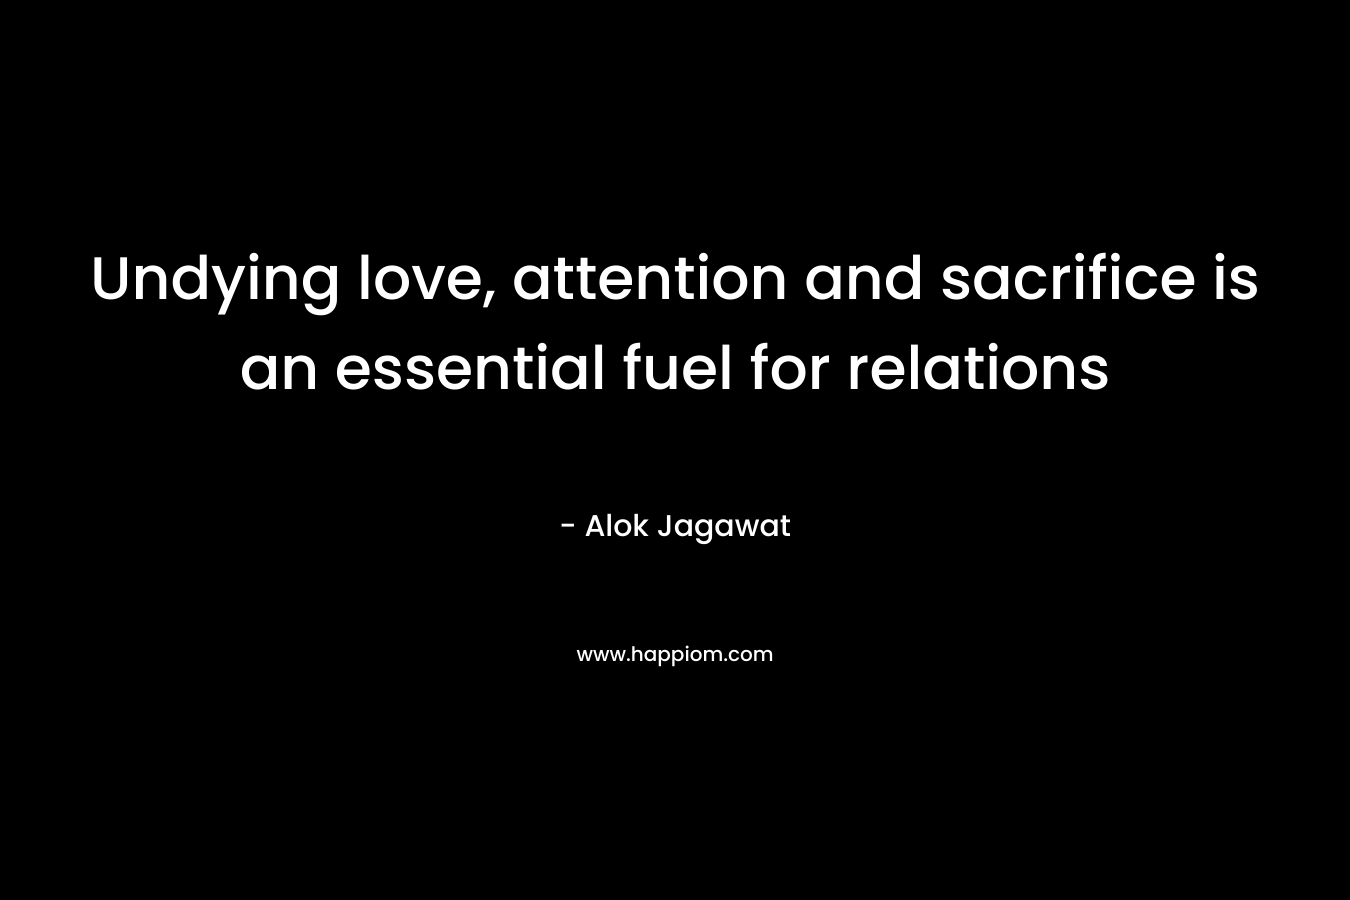 Undying love, attention and sacrifice is an essential fuel for relations – Alok Jagawat